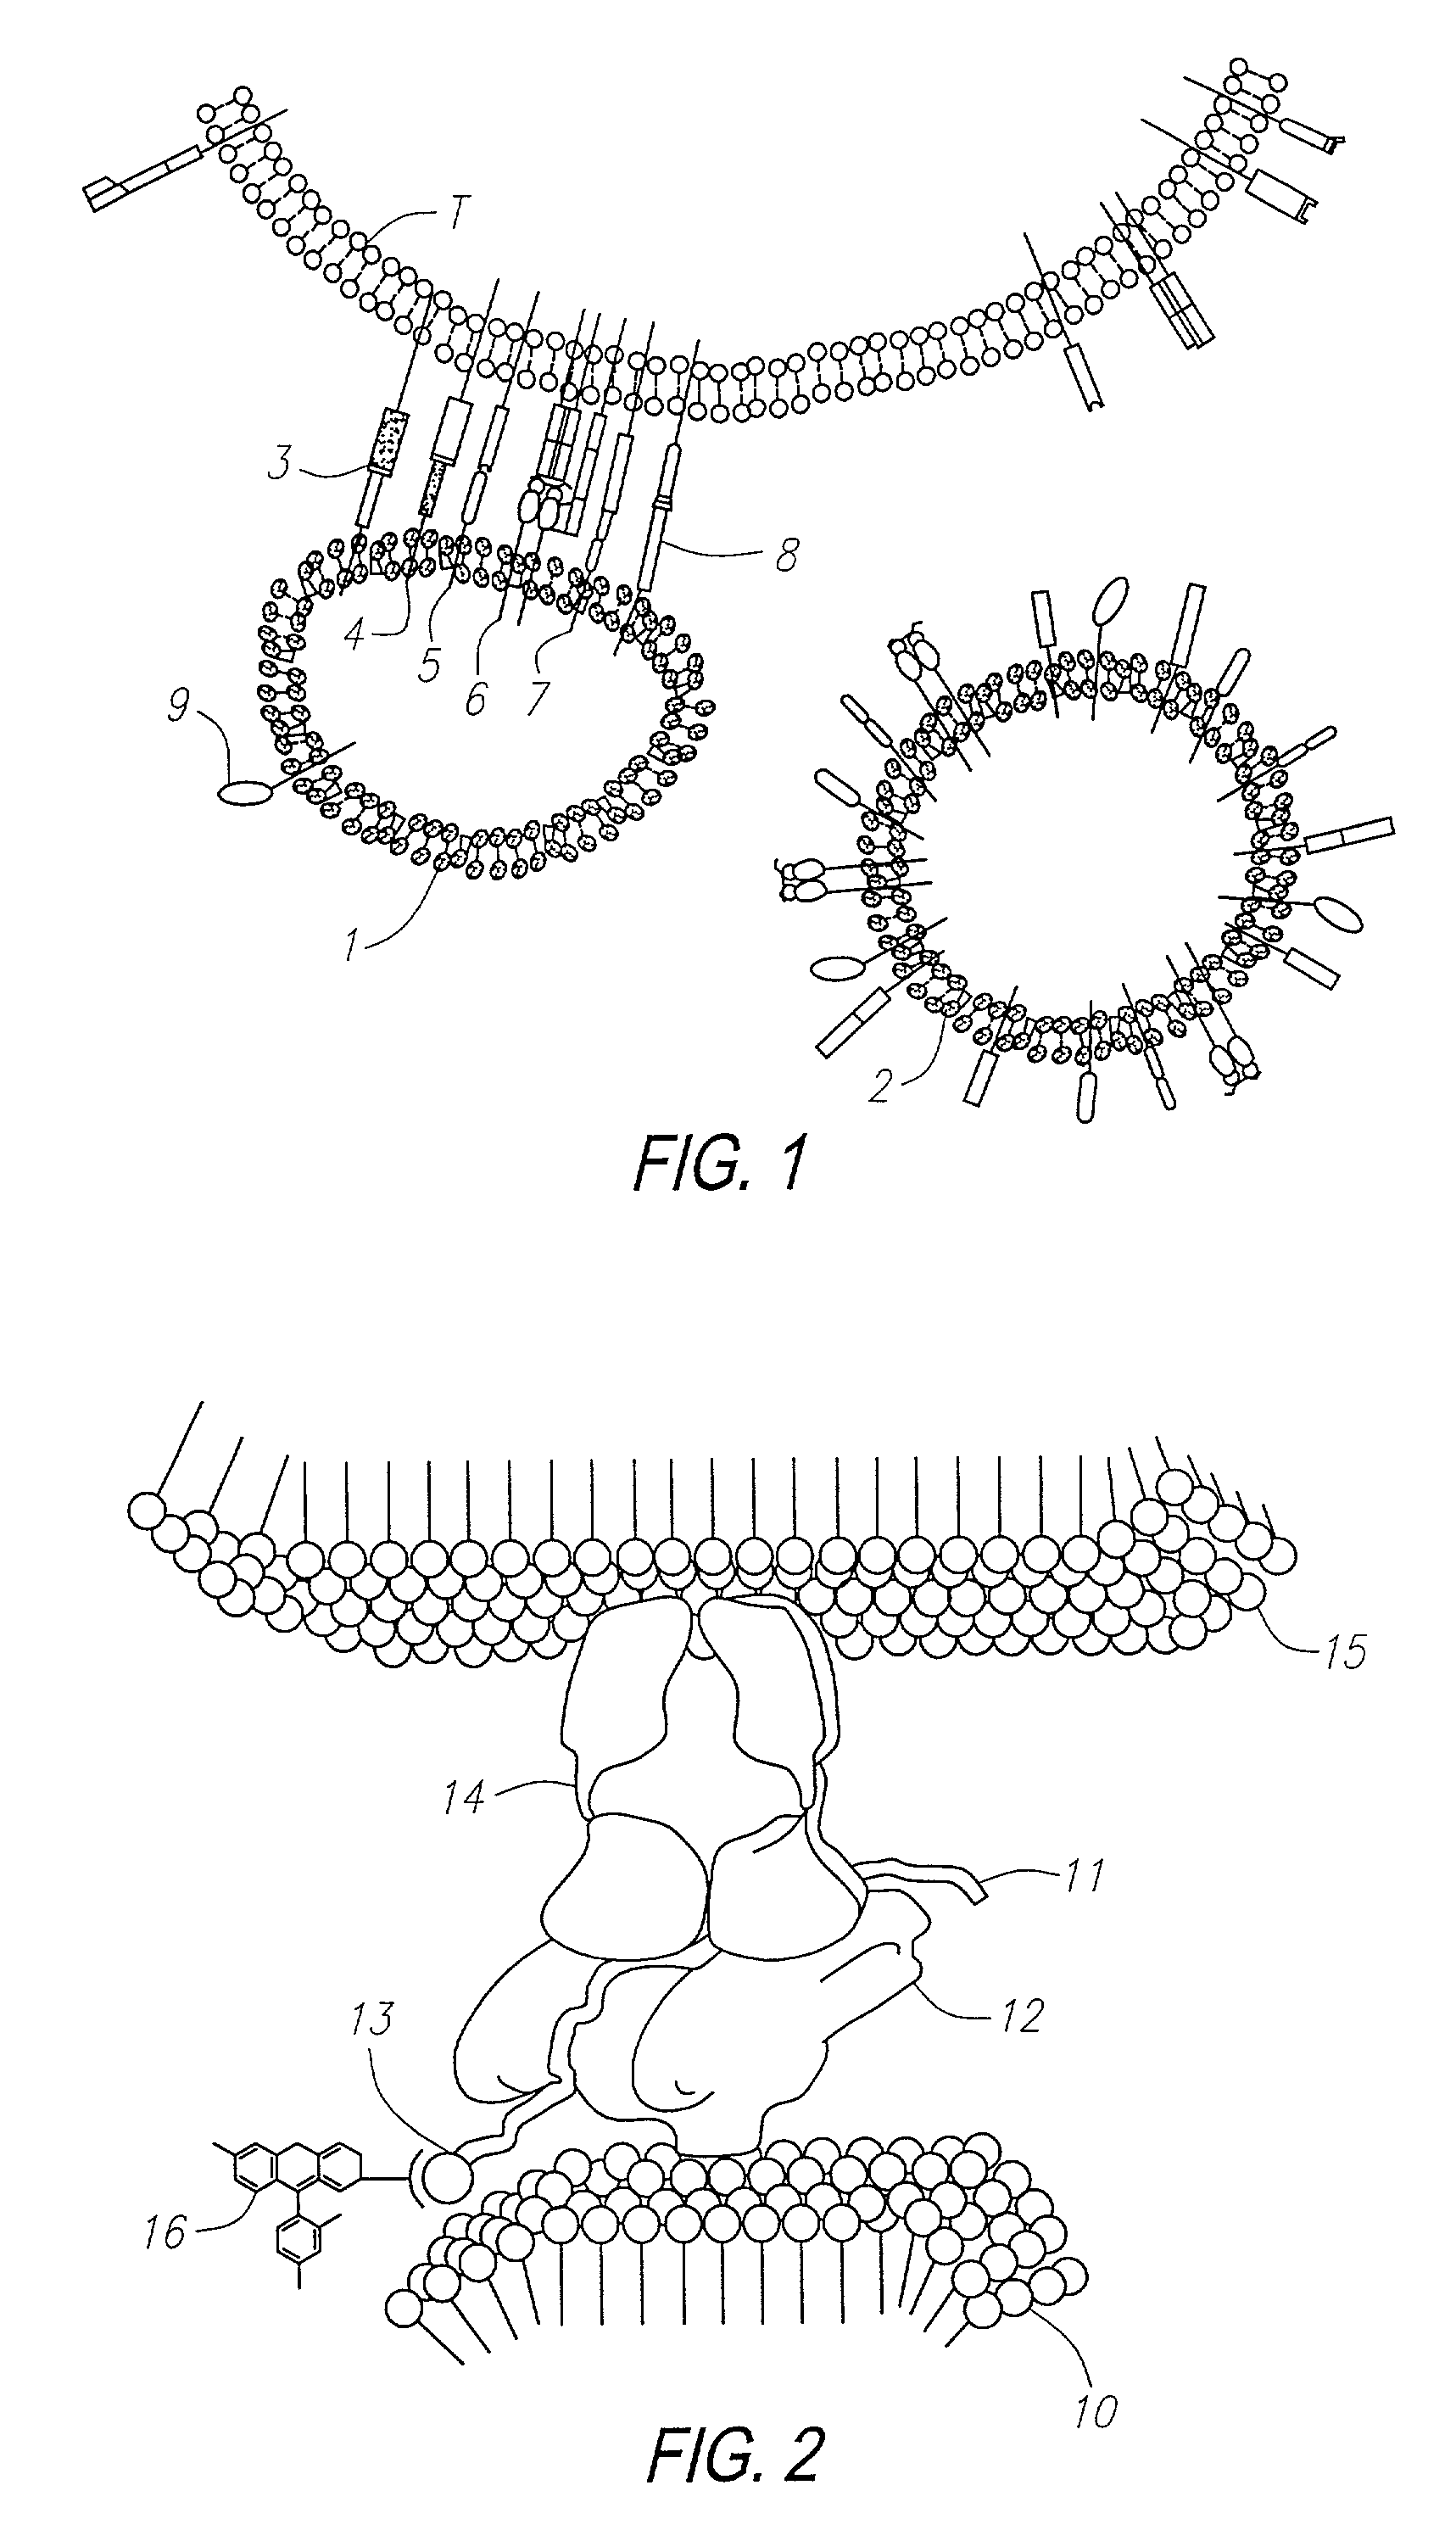 Methods for identifying and isolating antigen-specific T cells